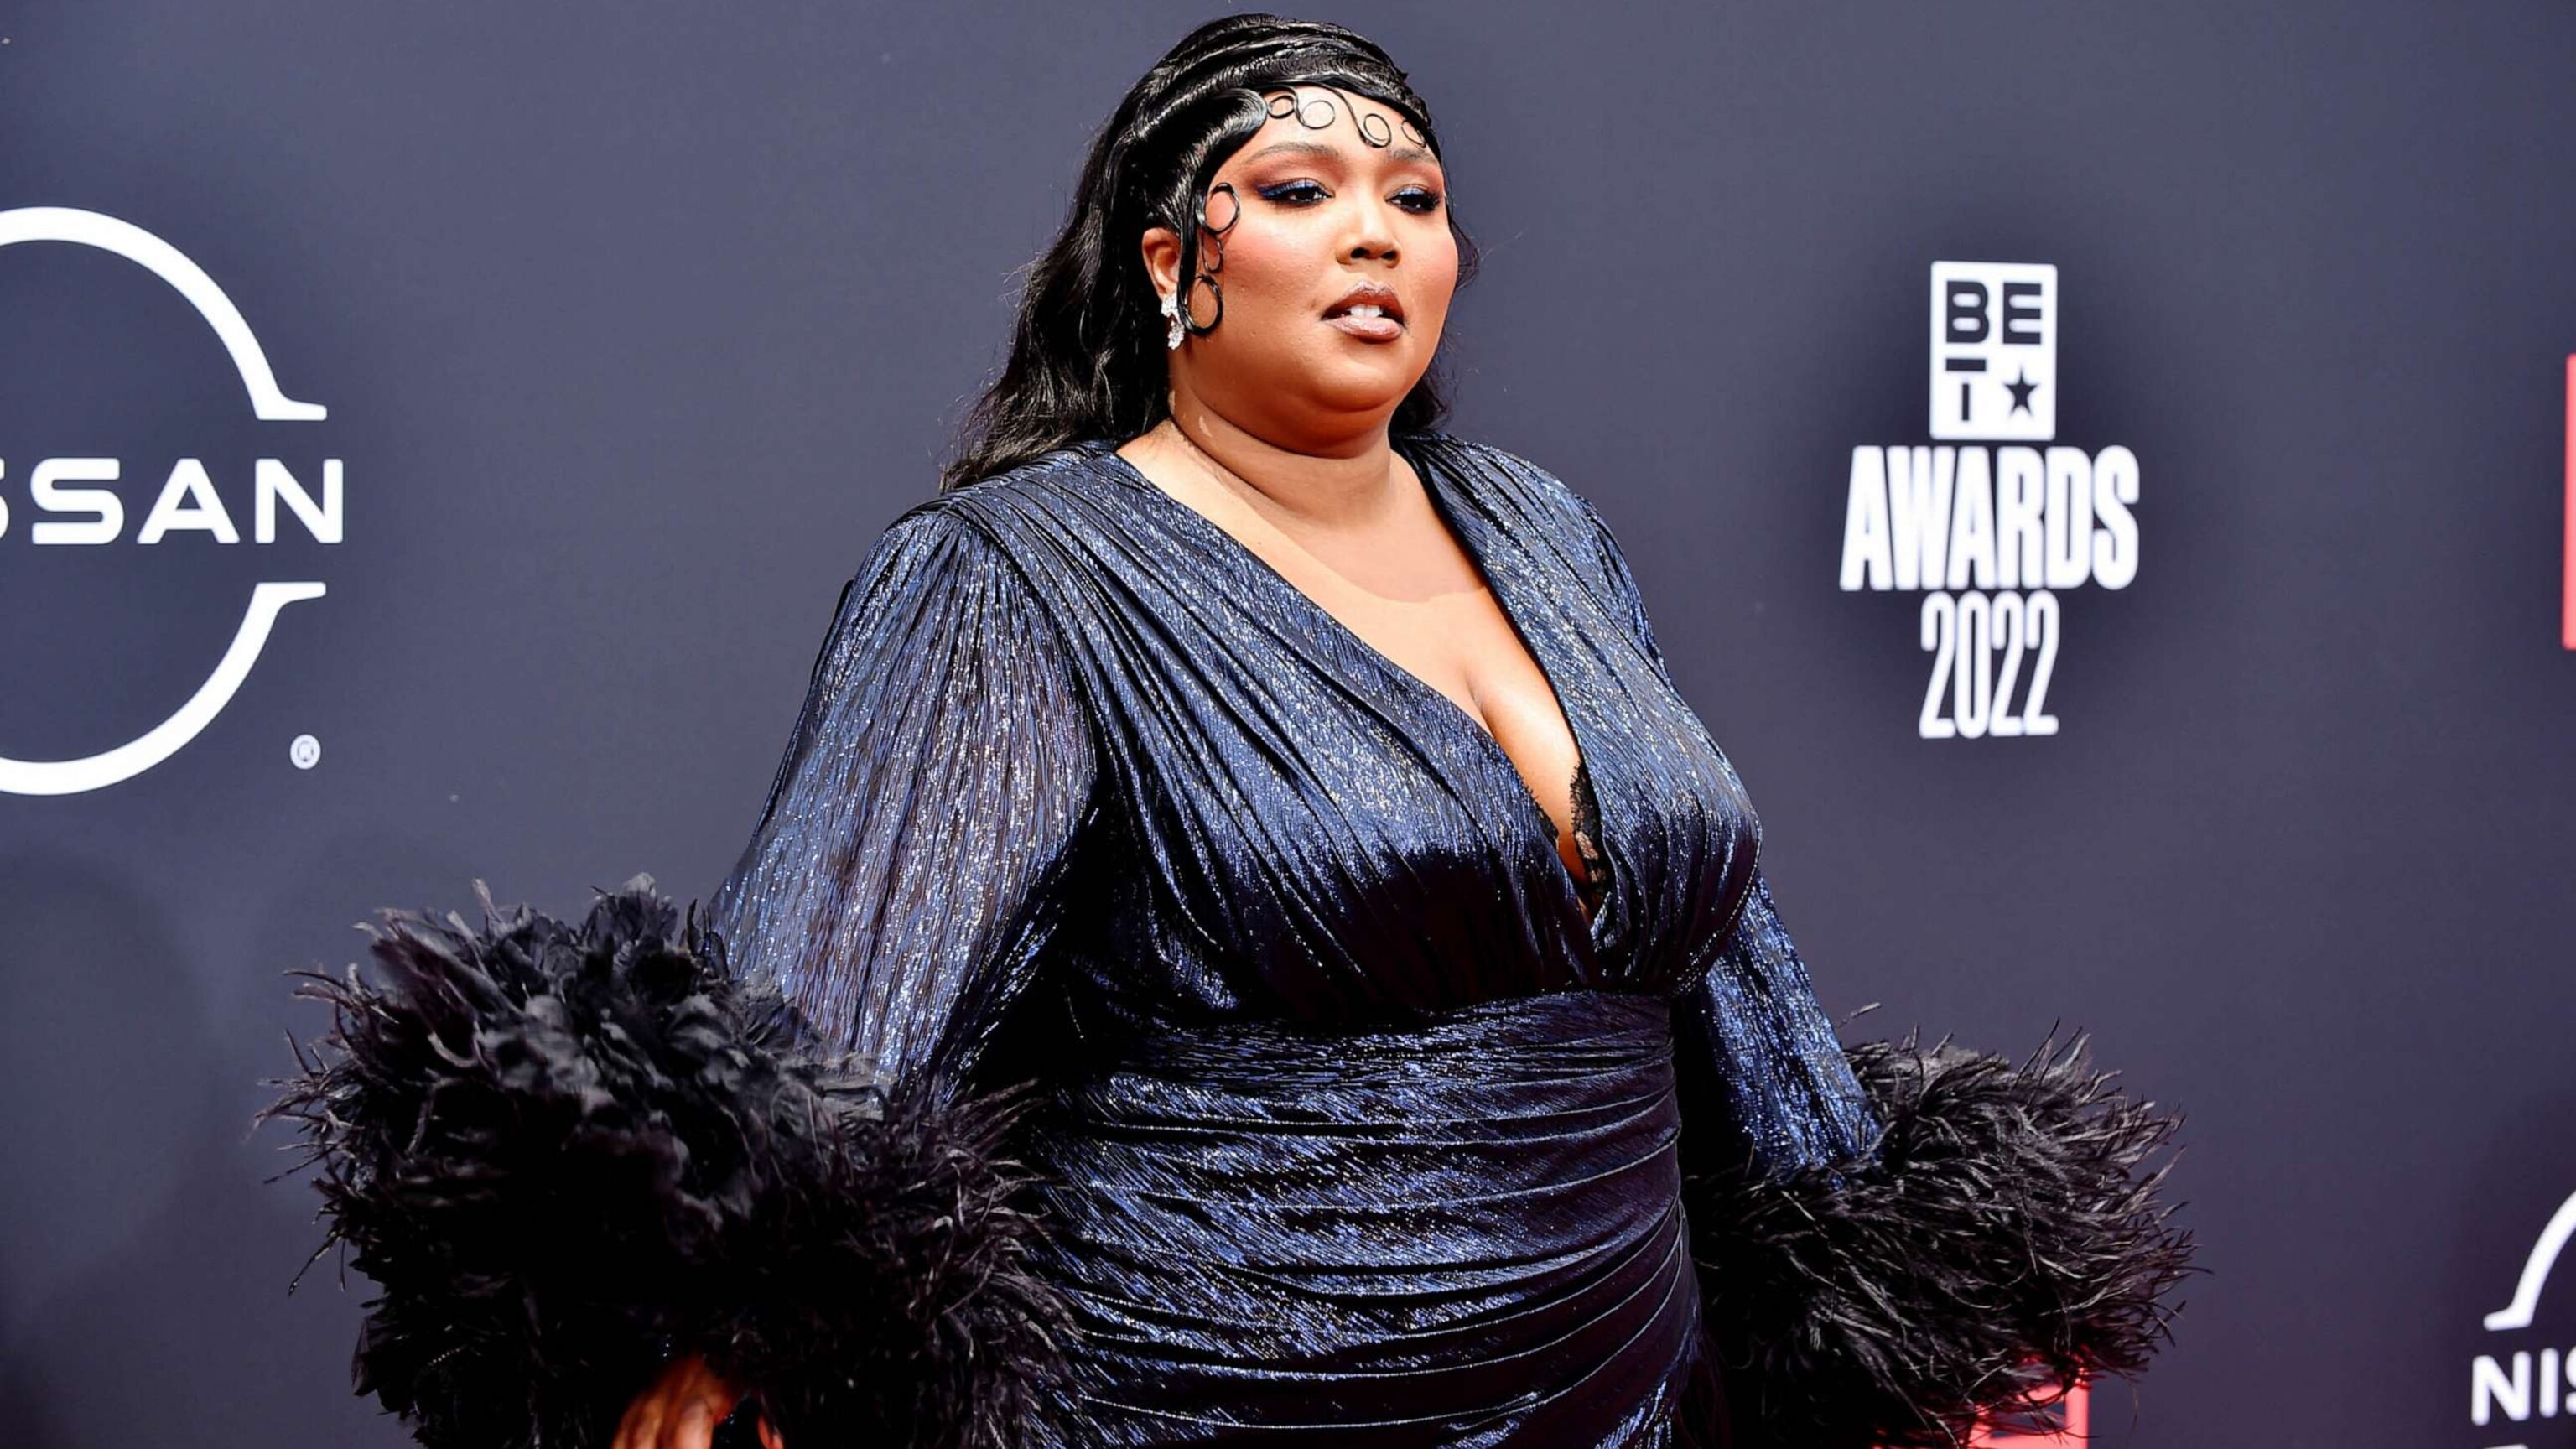 Lizzo and others sued by another employee alleging harassment, illegal